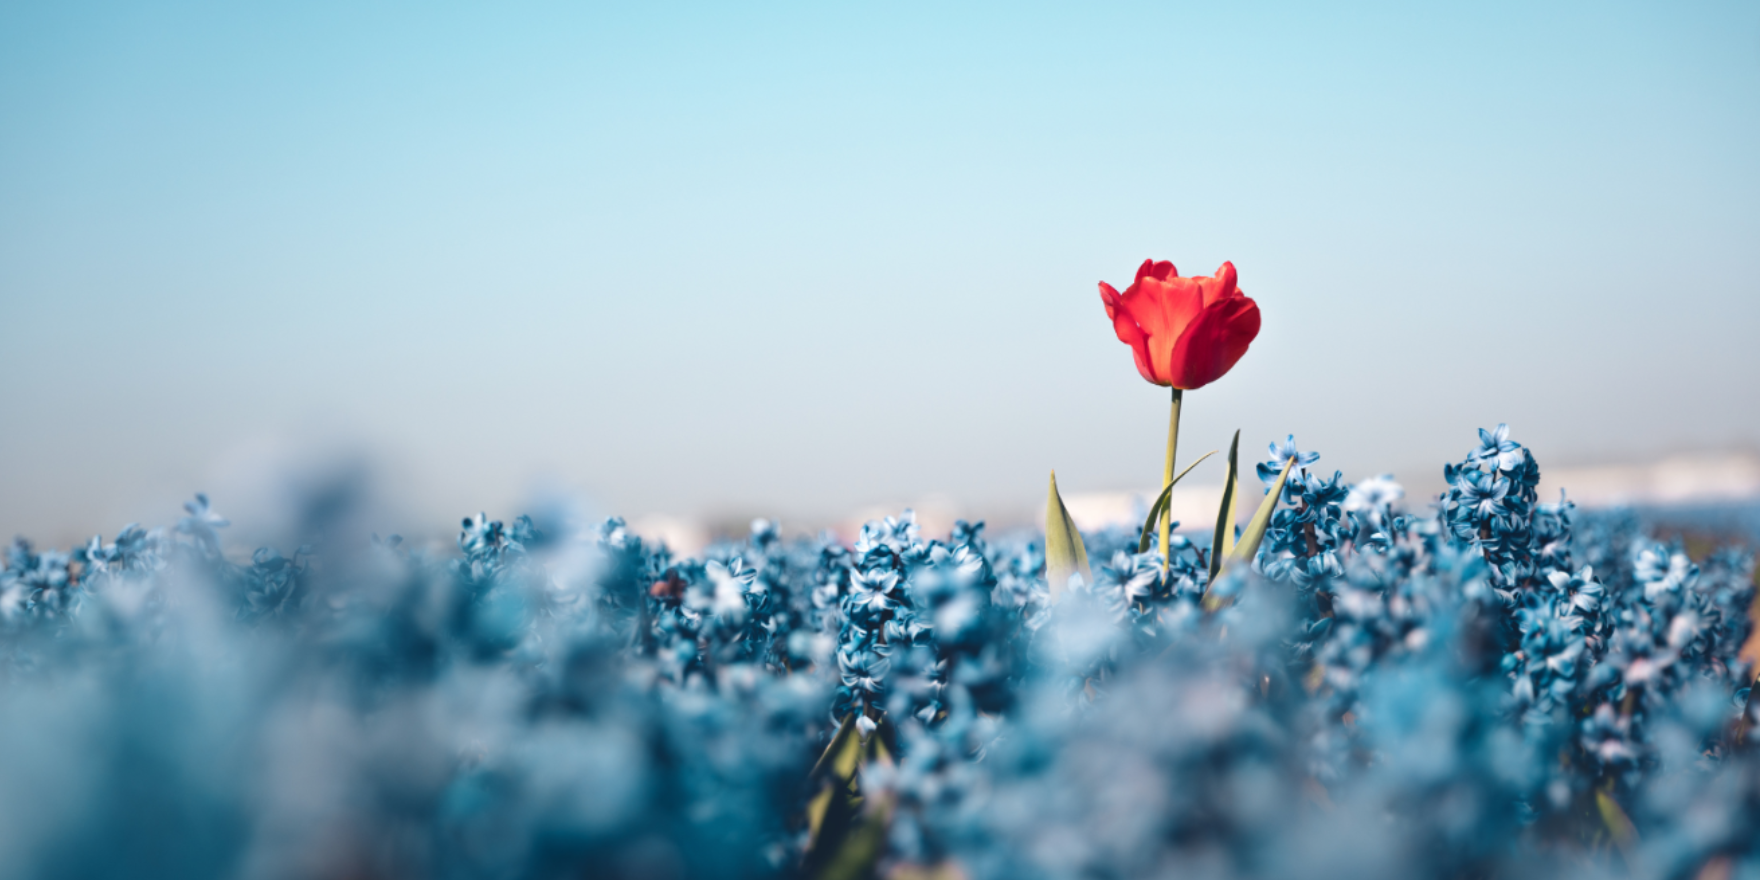 A single red flower growing amidst blue flowers